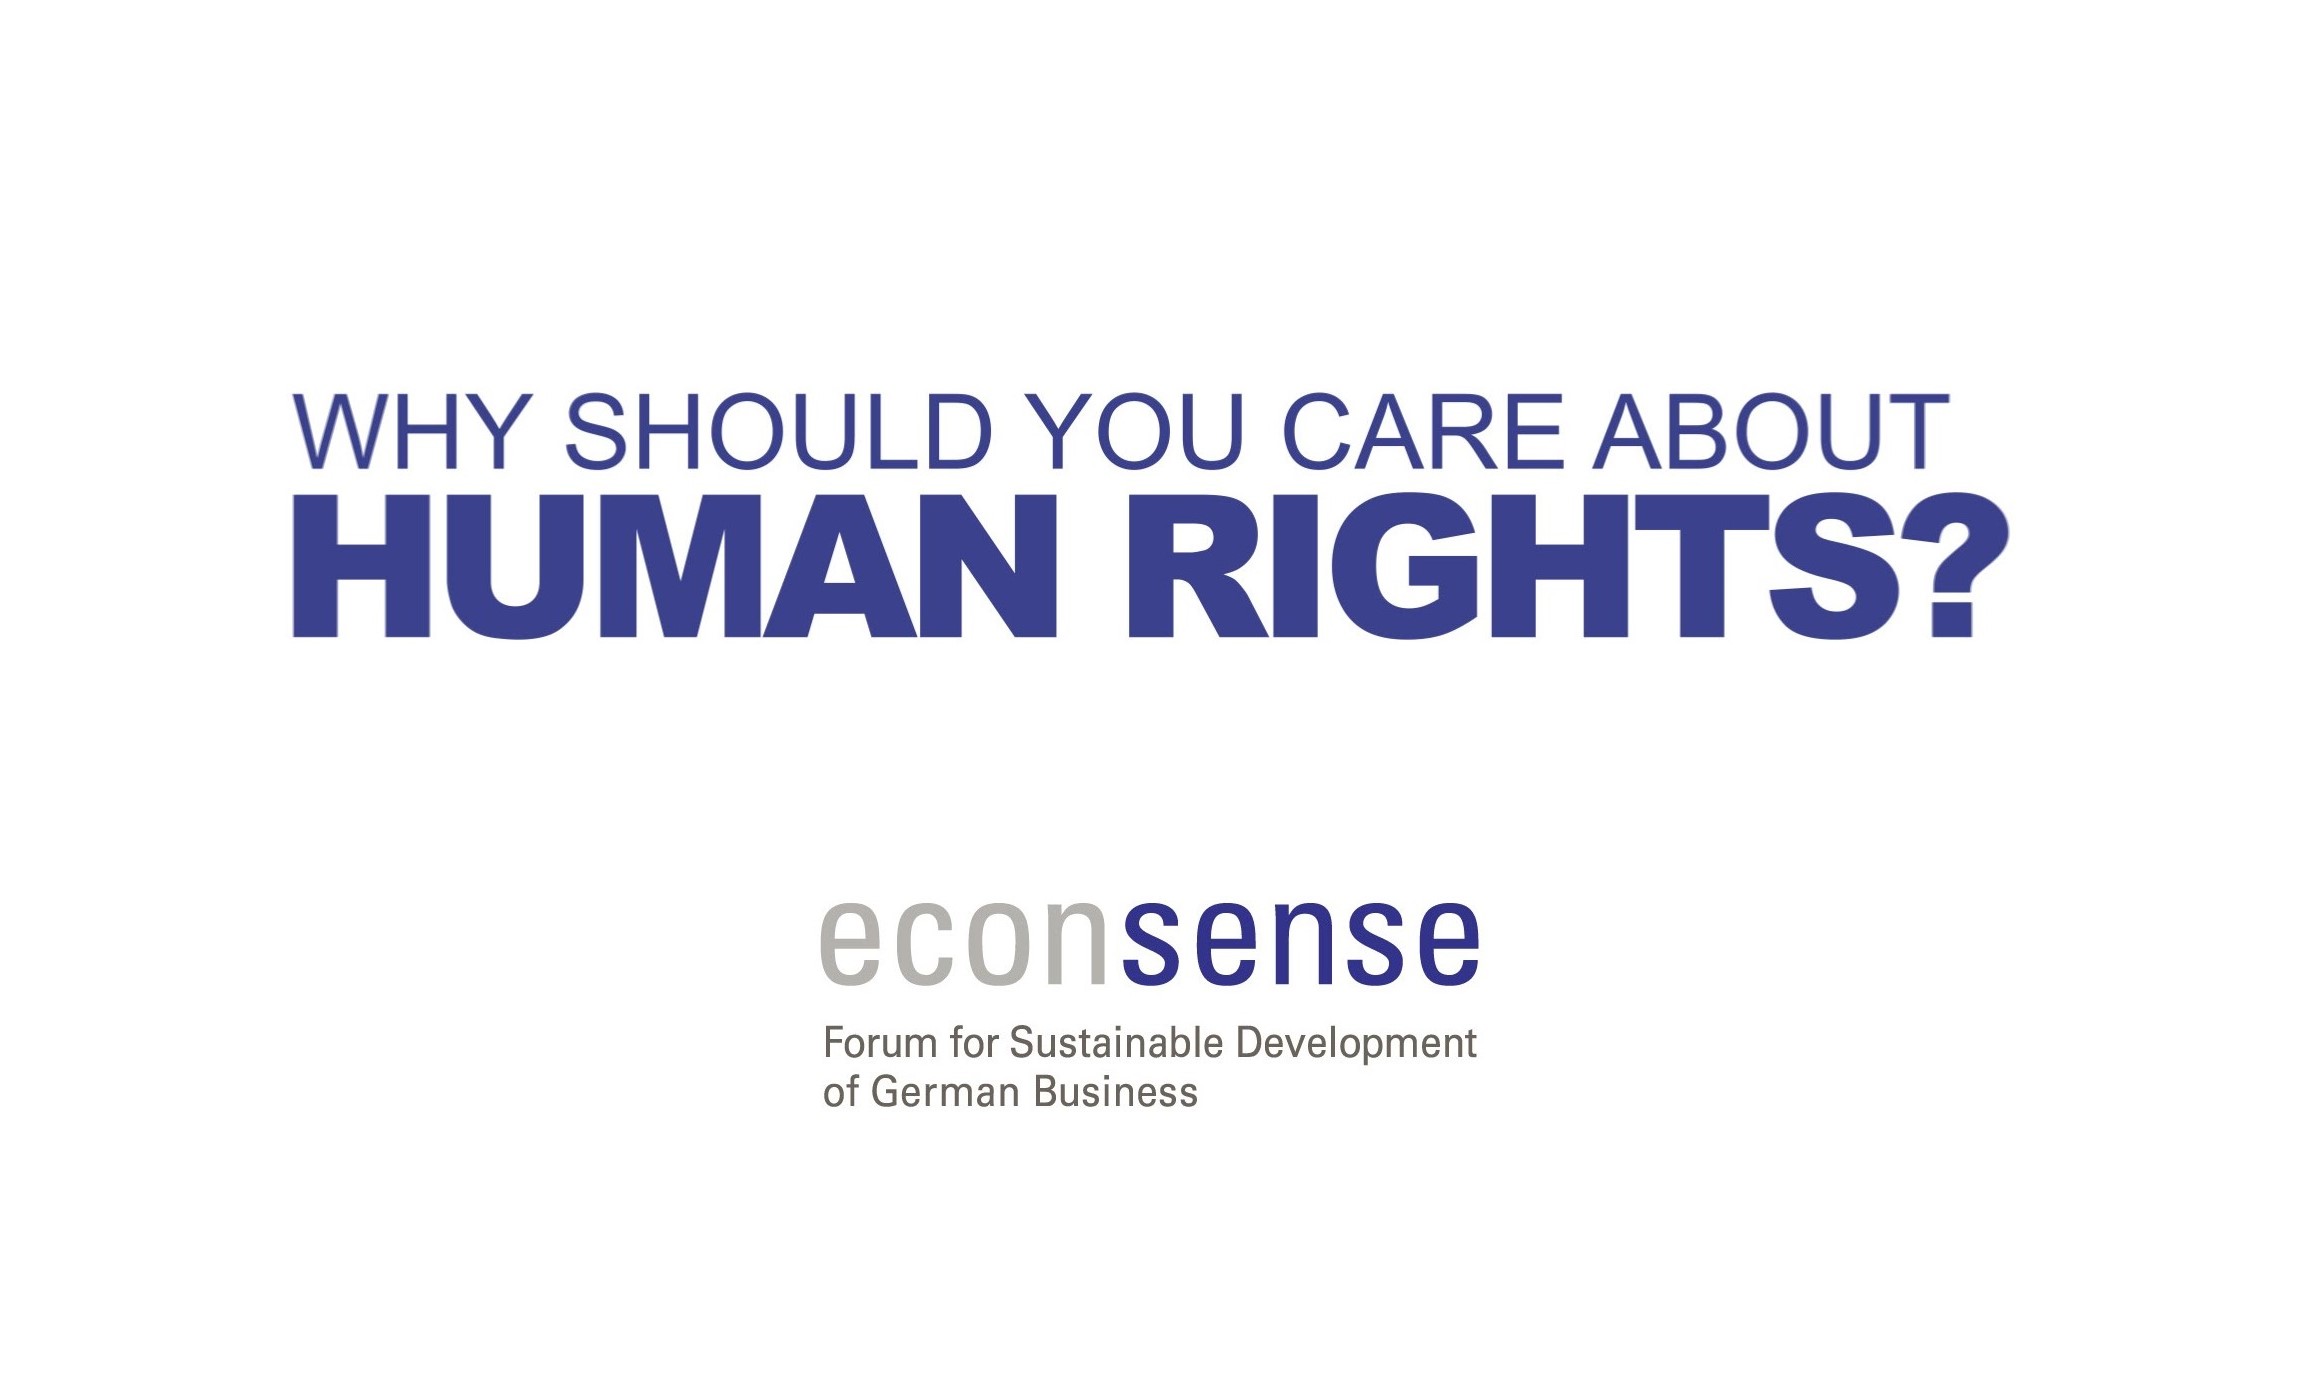 Human Rights Priorities for the Beauty and Personal Care Sector, Primers, Sustainable Business Network and Consultancy